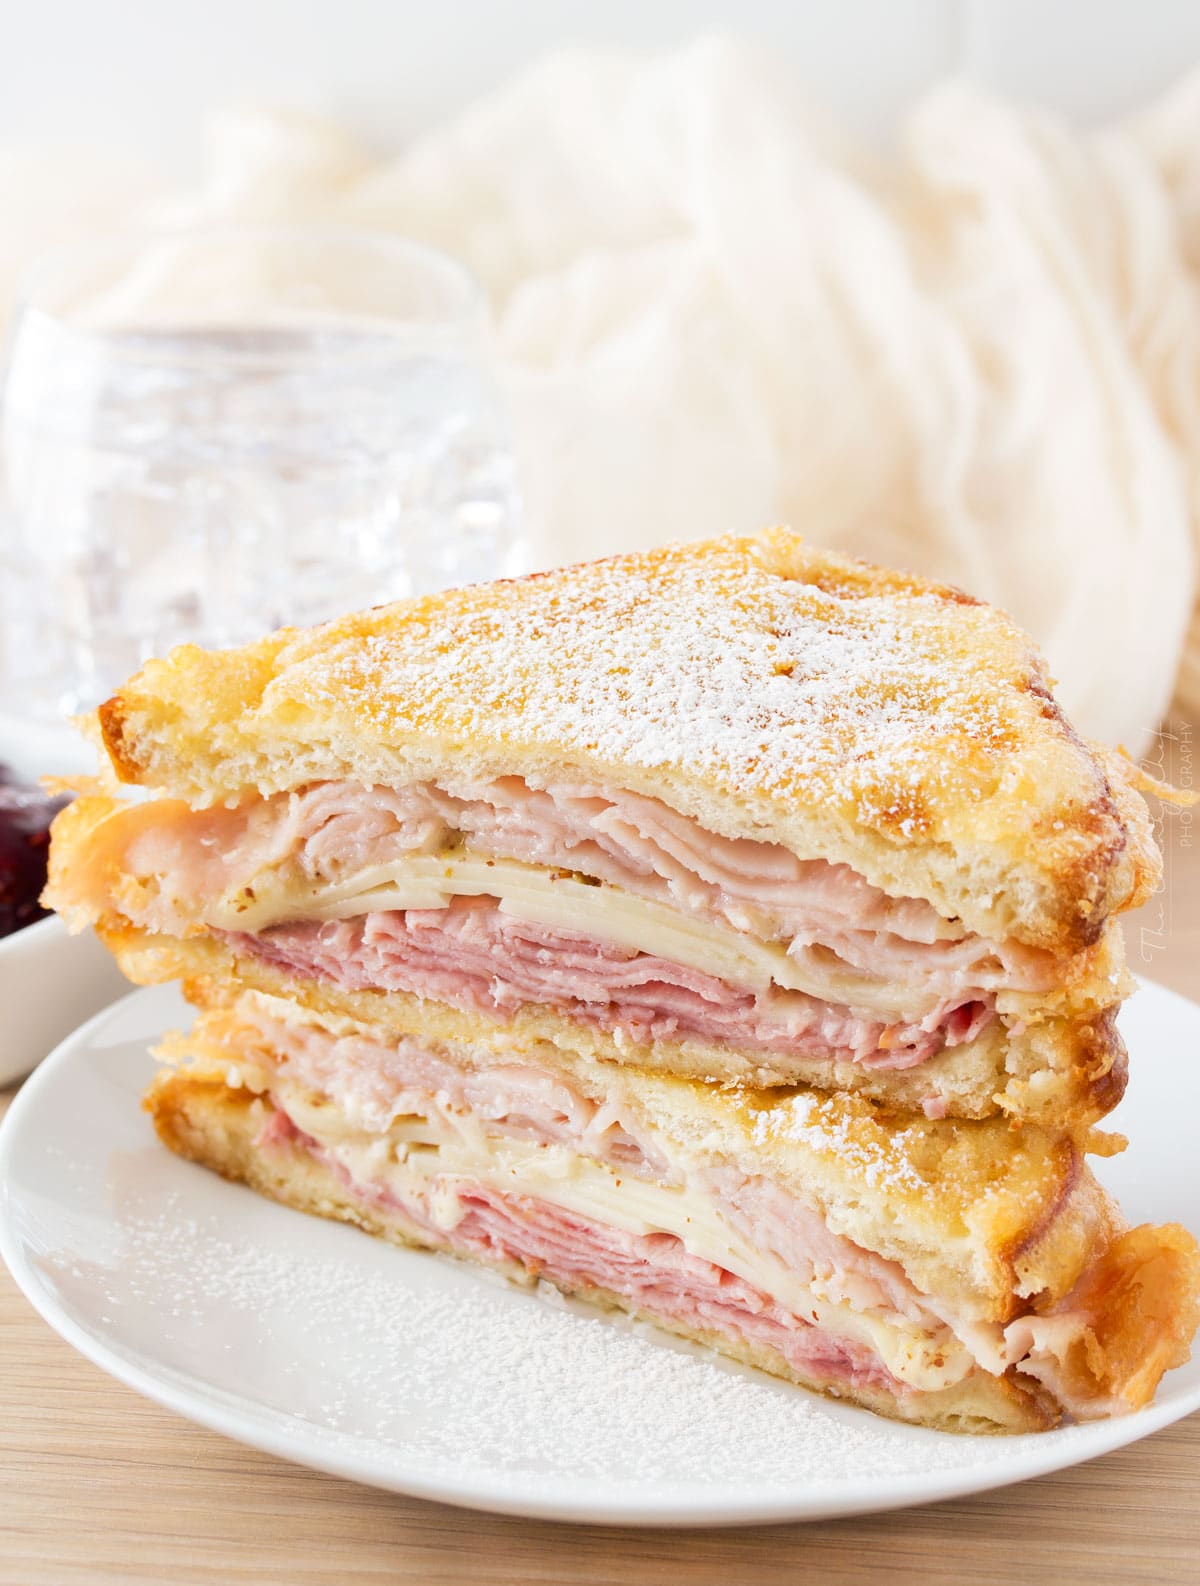 Monte Cristo Sandwiches | Such a fun and delicious meal... the monte cristo sandwich can be controversial. People either love it or hate it... which are you? | http://thechunkychef.com